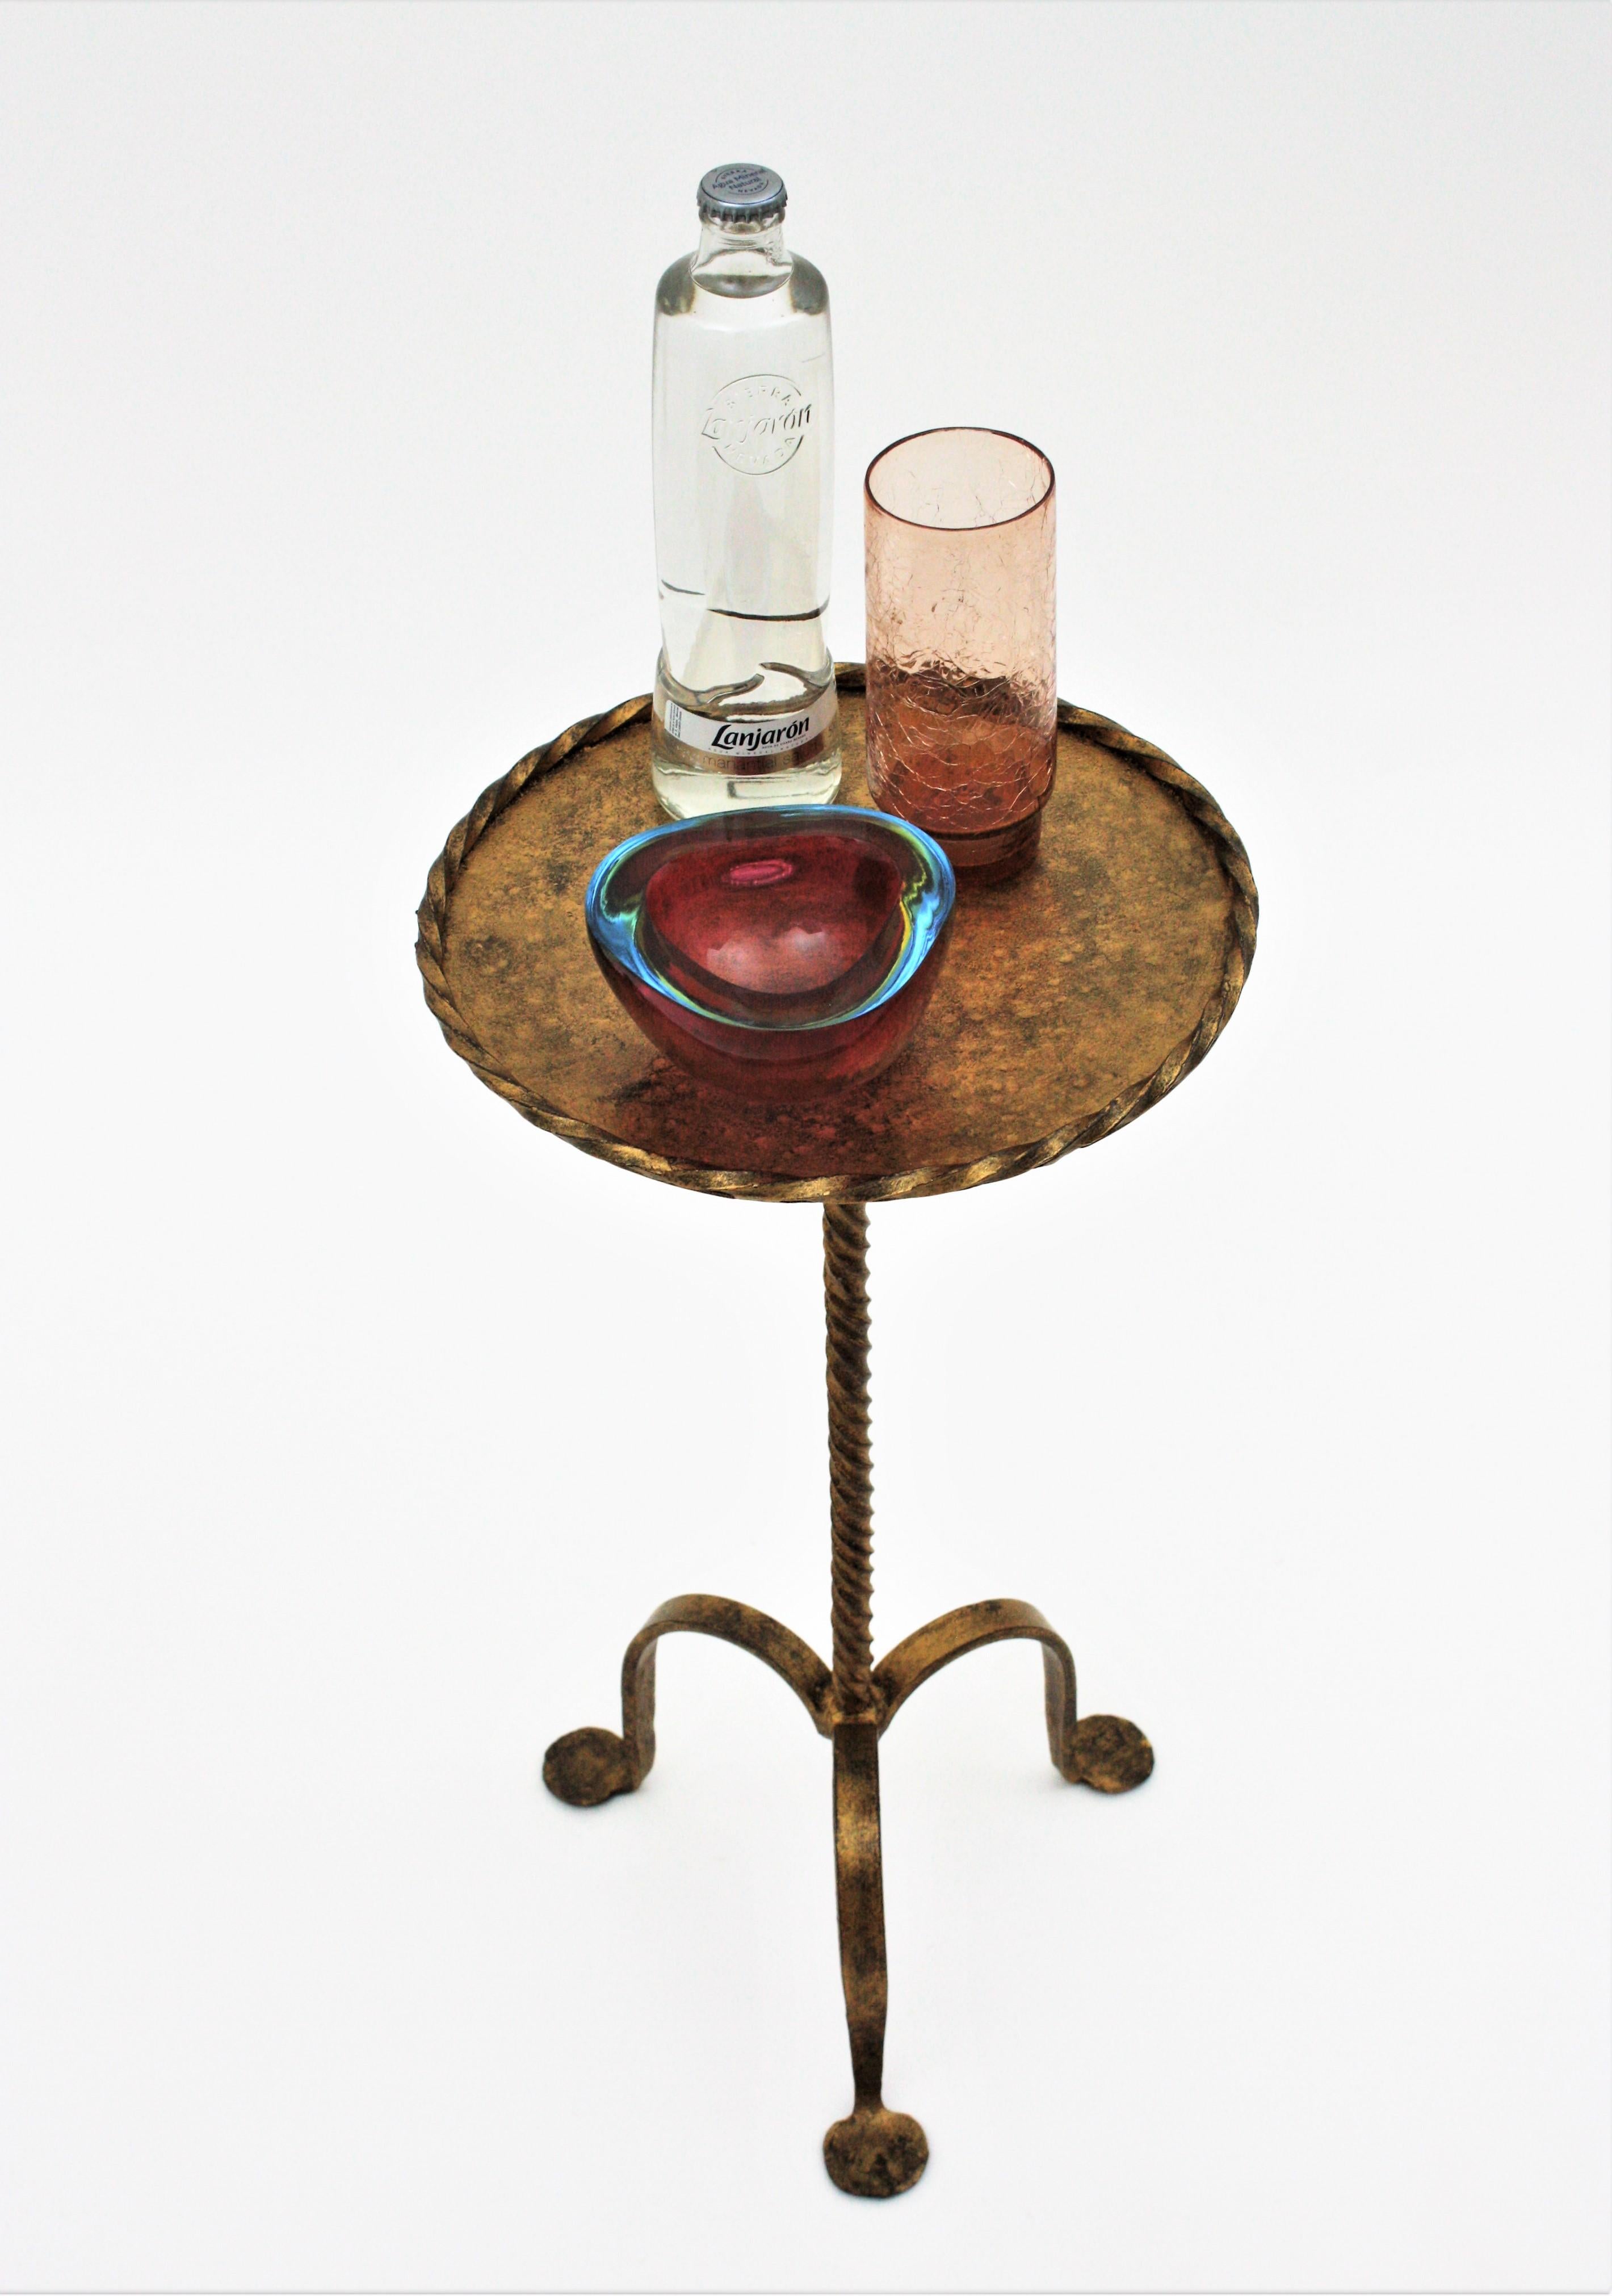 Gothic style hand-hammered gilt iron guéridon or pedestal table with twisted edged top standing on a tripod base, Spain, 1930s.
This Martini table stands on a three-footed baseand it has a richly twisted stem. The top has a twisted iron rope